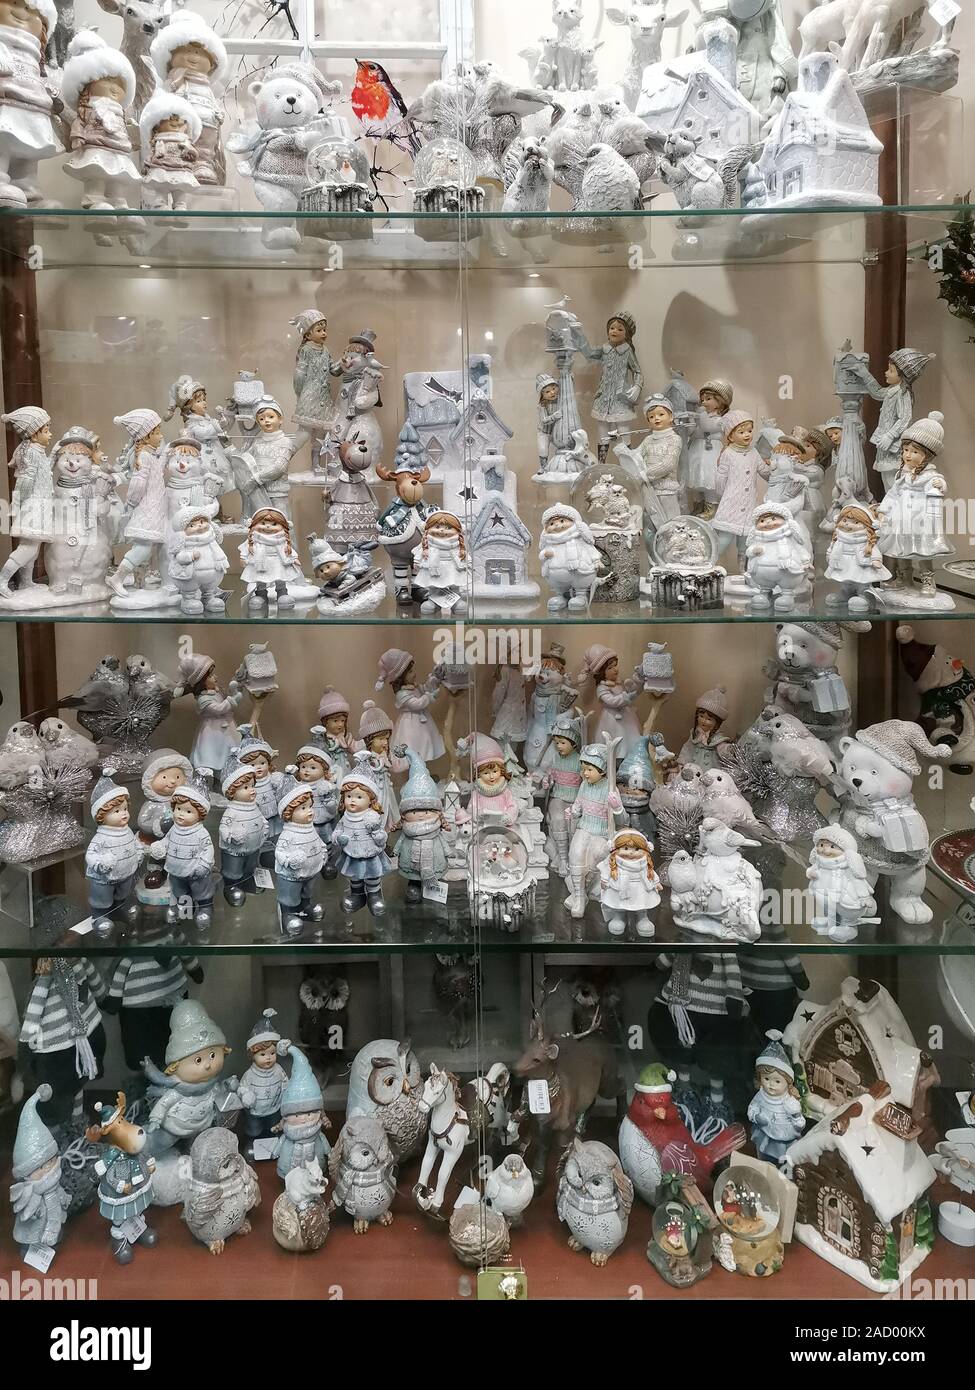 Yekaterinburg, Russia - November,23,2019: Glass window with Christmas gift  porcelain statuettes of toy animals and children in Church shop of Alexande  Stock Photo - Alamy